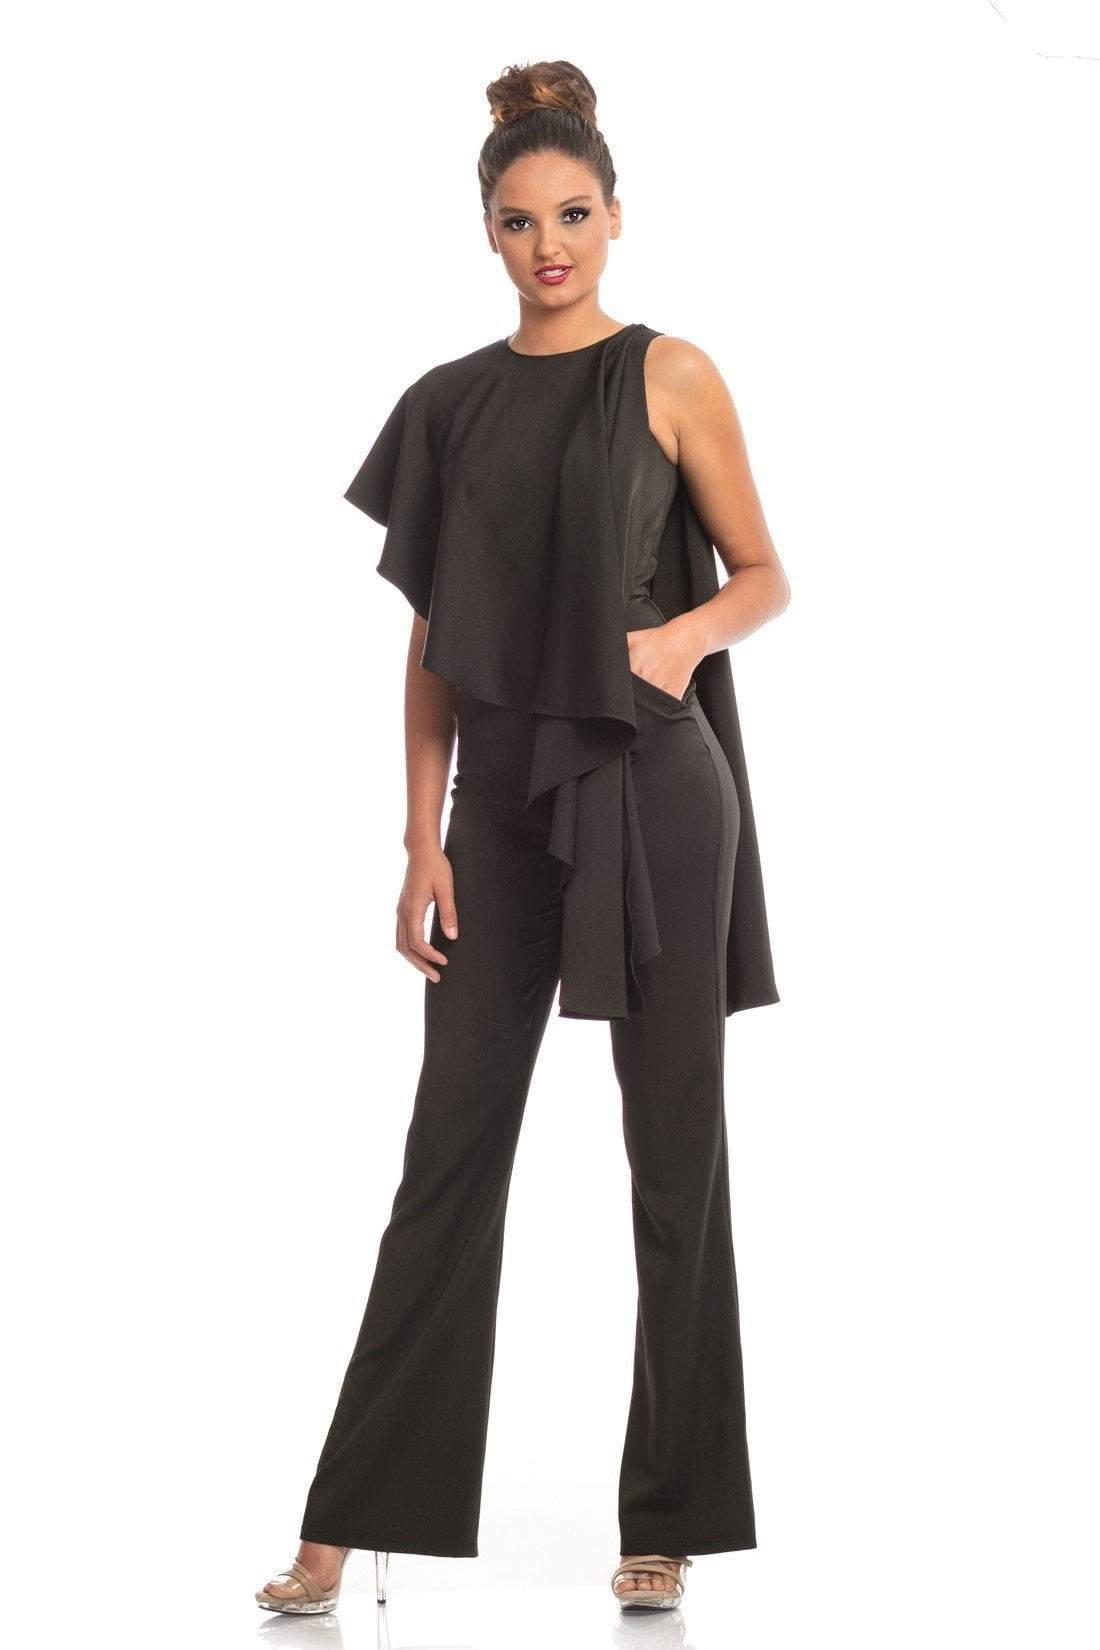 Johnathan Kayne - 9083 Sleeveless Jewel Neck Jumpsuit With Cape Detail In Black